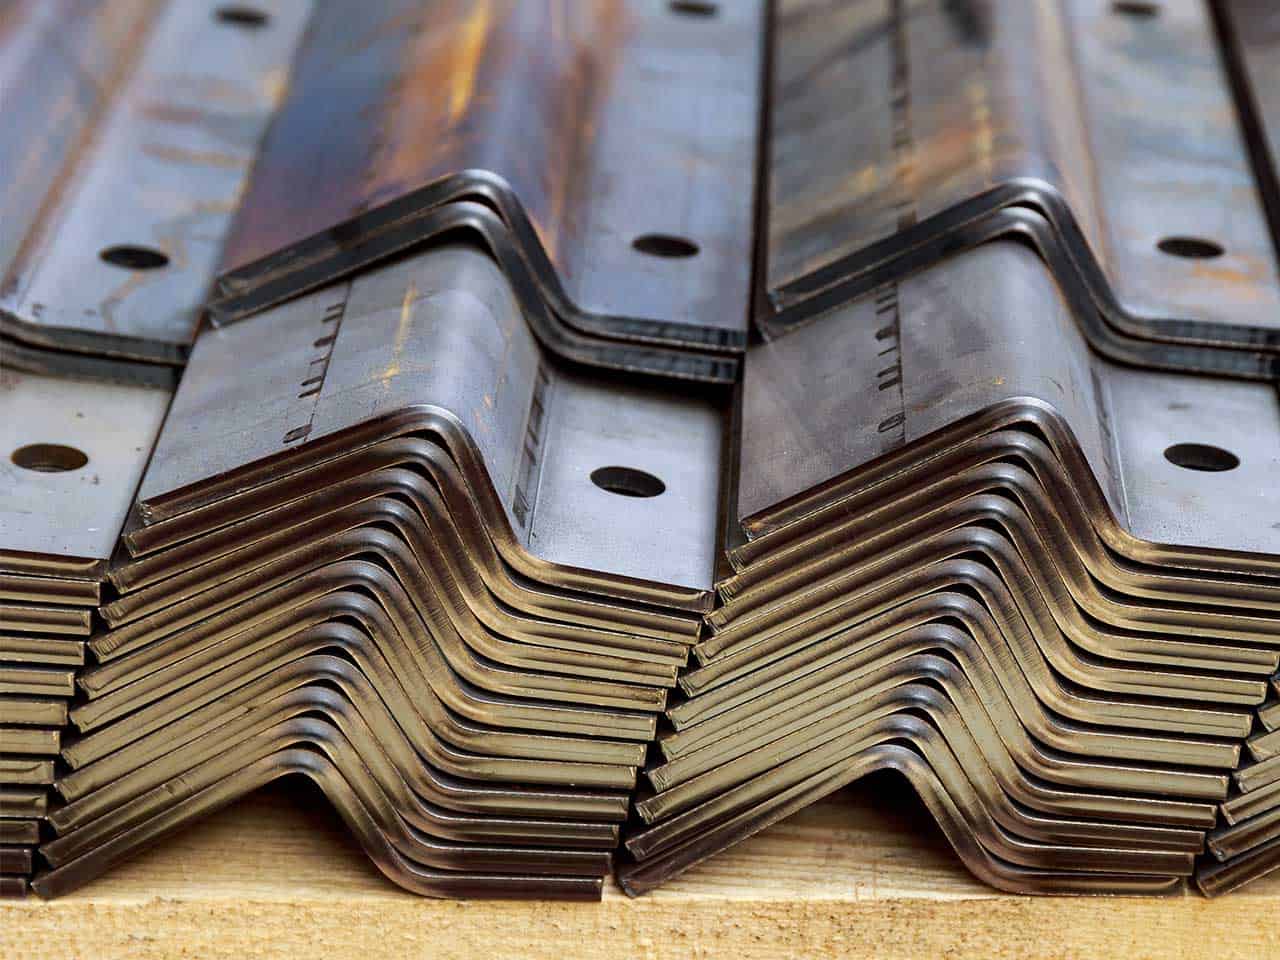 Neatly stacked metal brackets with a zigzag shape, featuring circular holes and slight rust patches, arranged on a wooden surface.